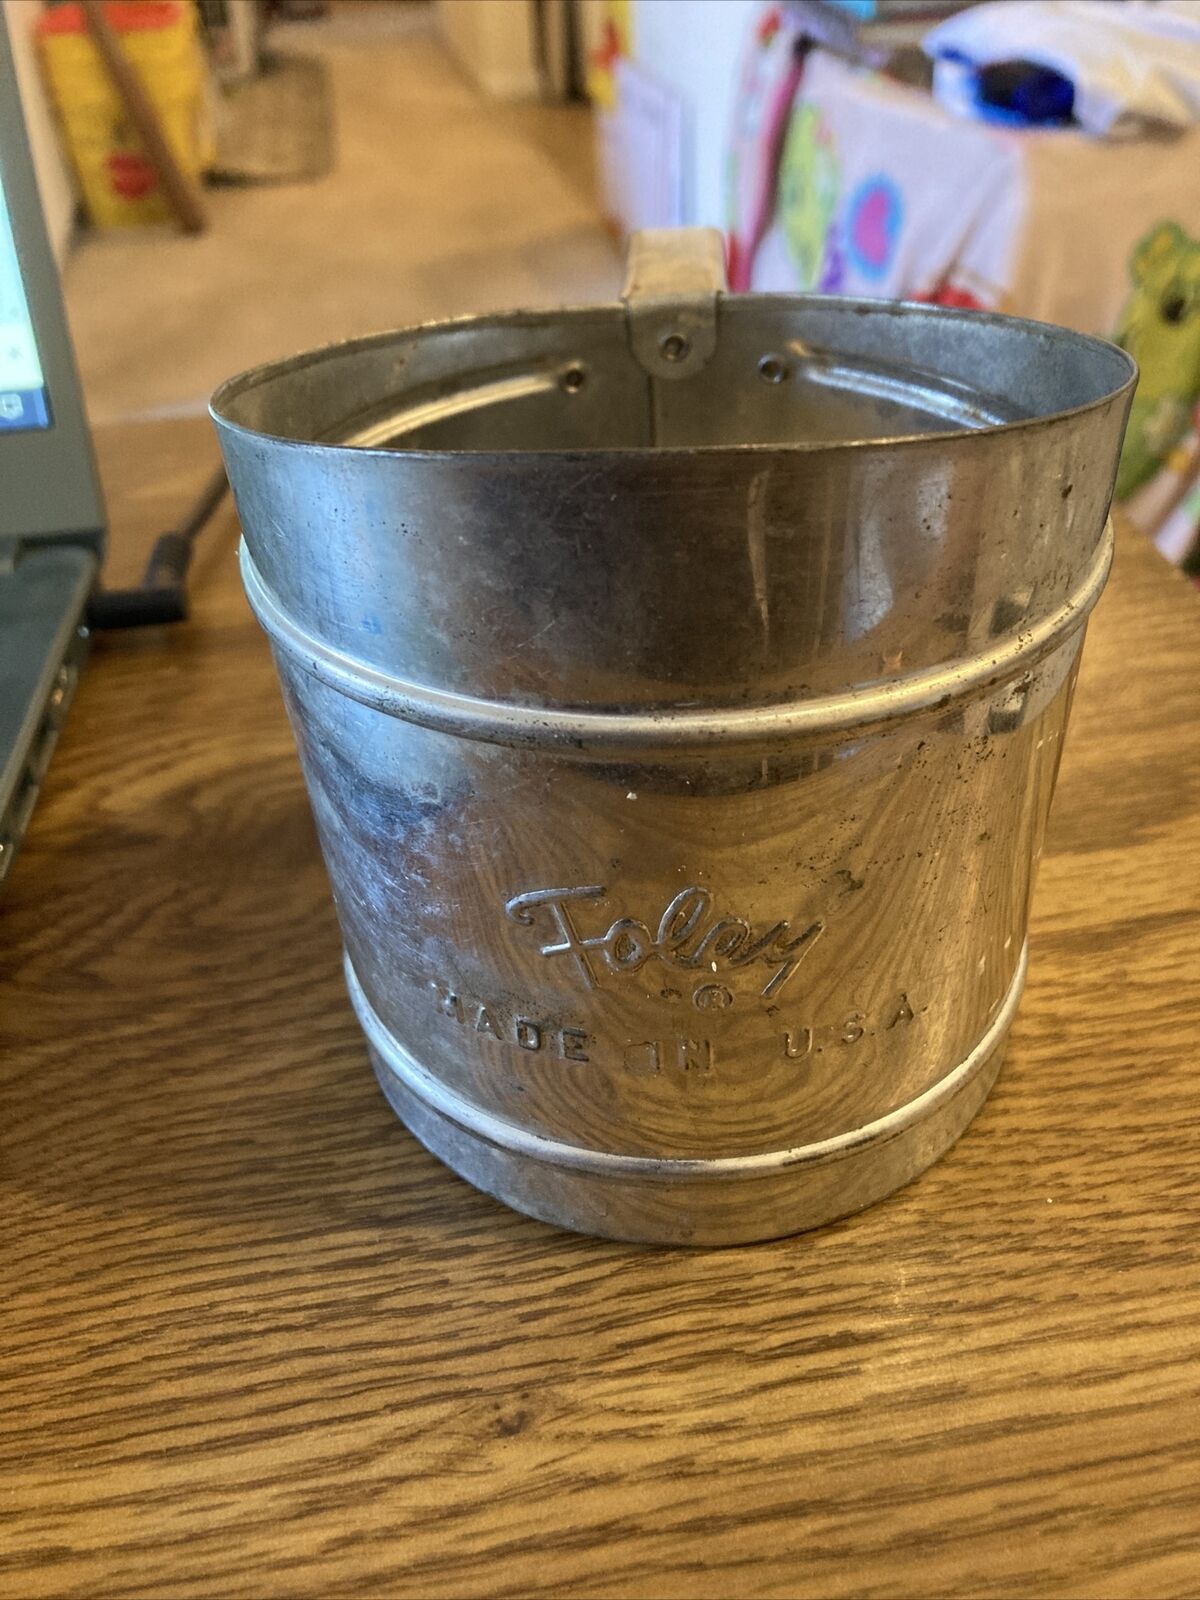 Vintage FOLEY USA 2 Cup Flour Sifter with Metal Squeeze Handle, Circa 1950s